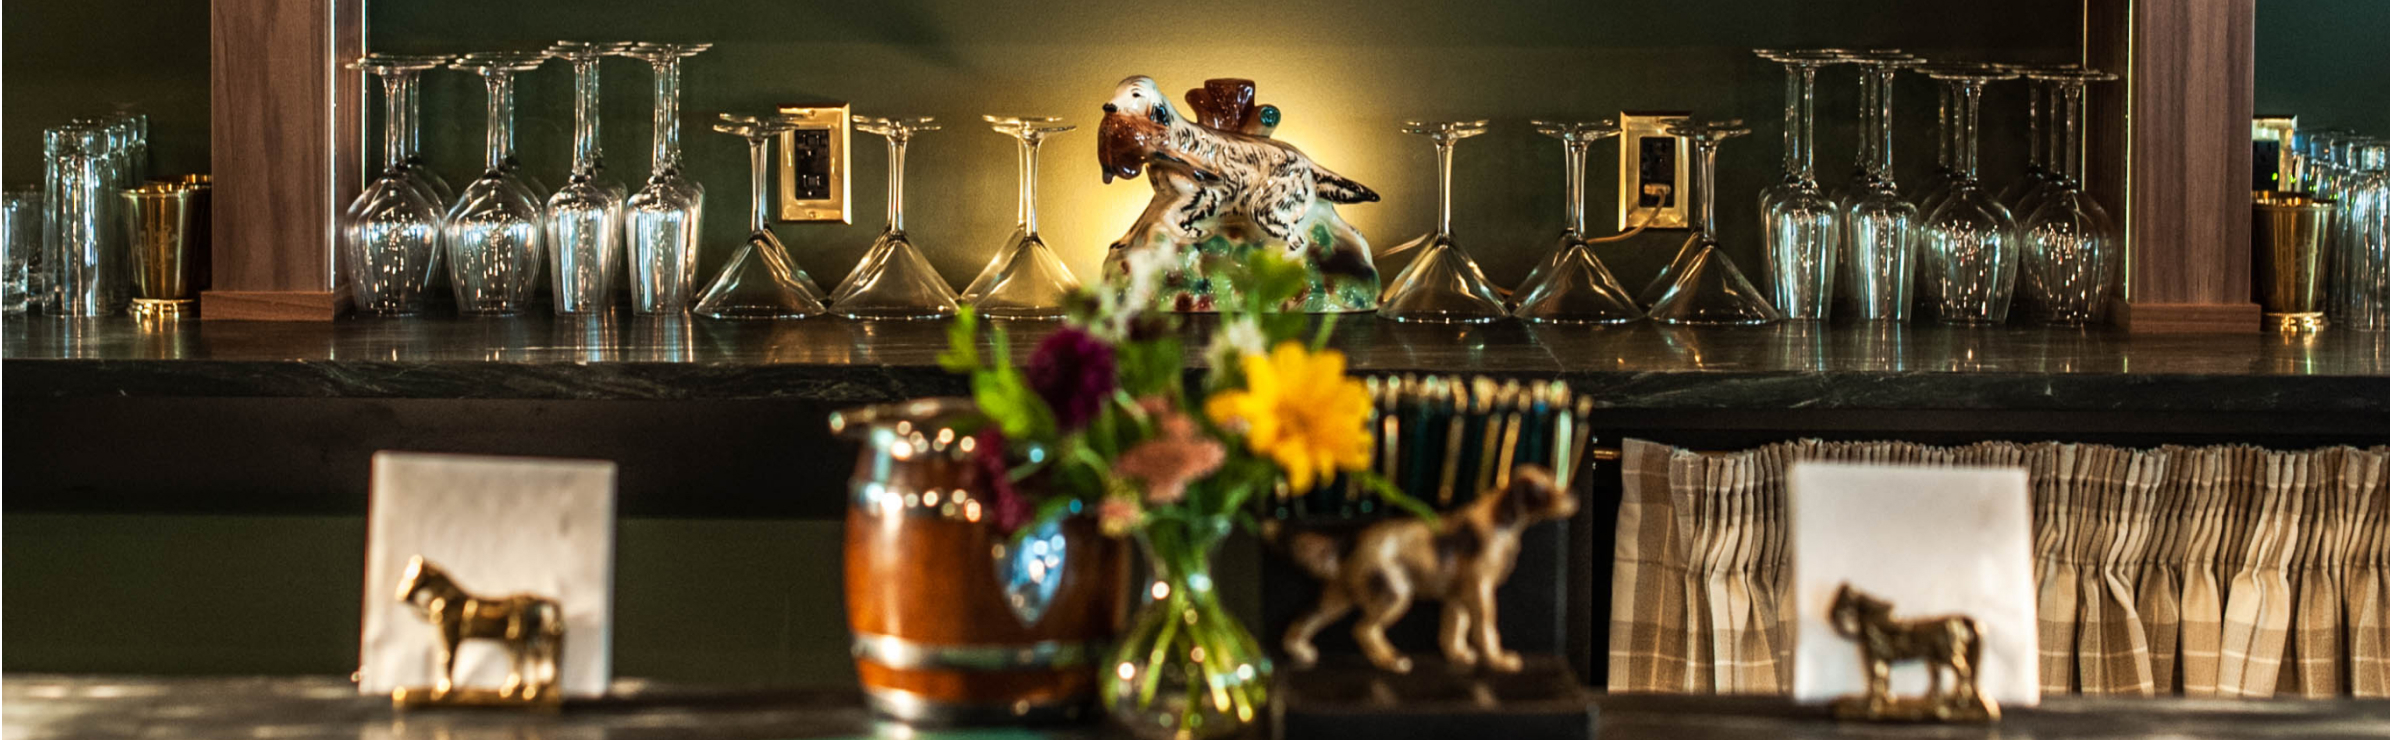 Bar back featuring neatly arranged bar glasses of different shapes. Decor includes vase of flowers and hunting dogs.